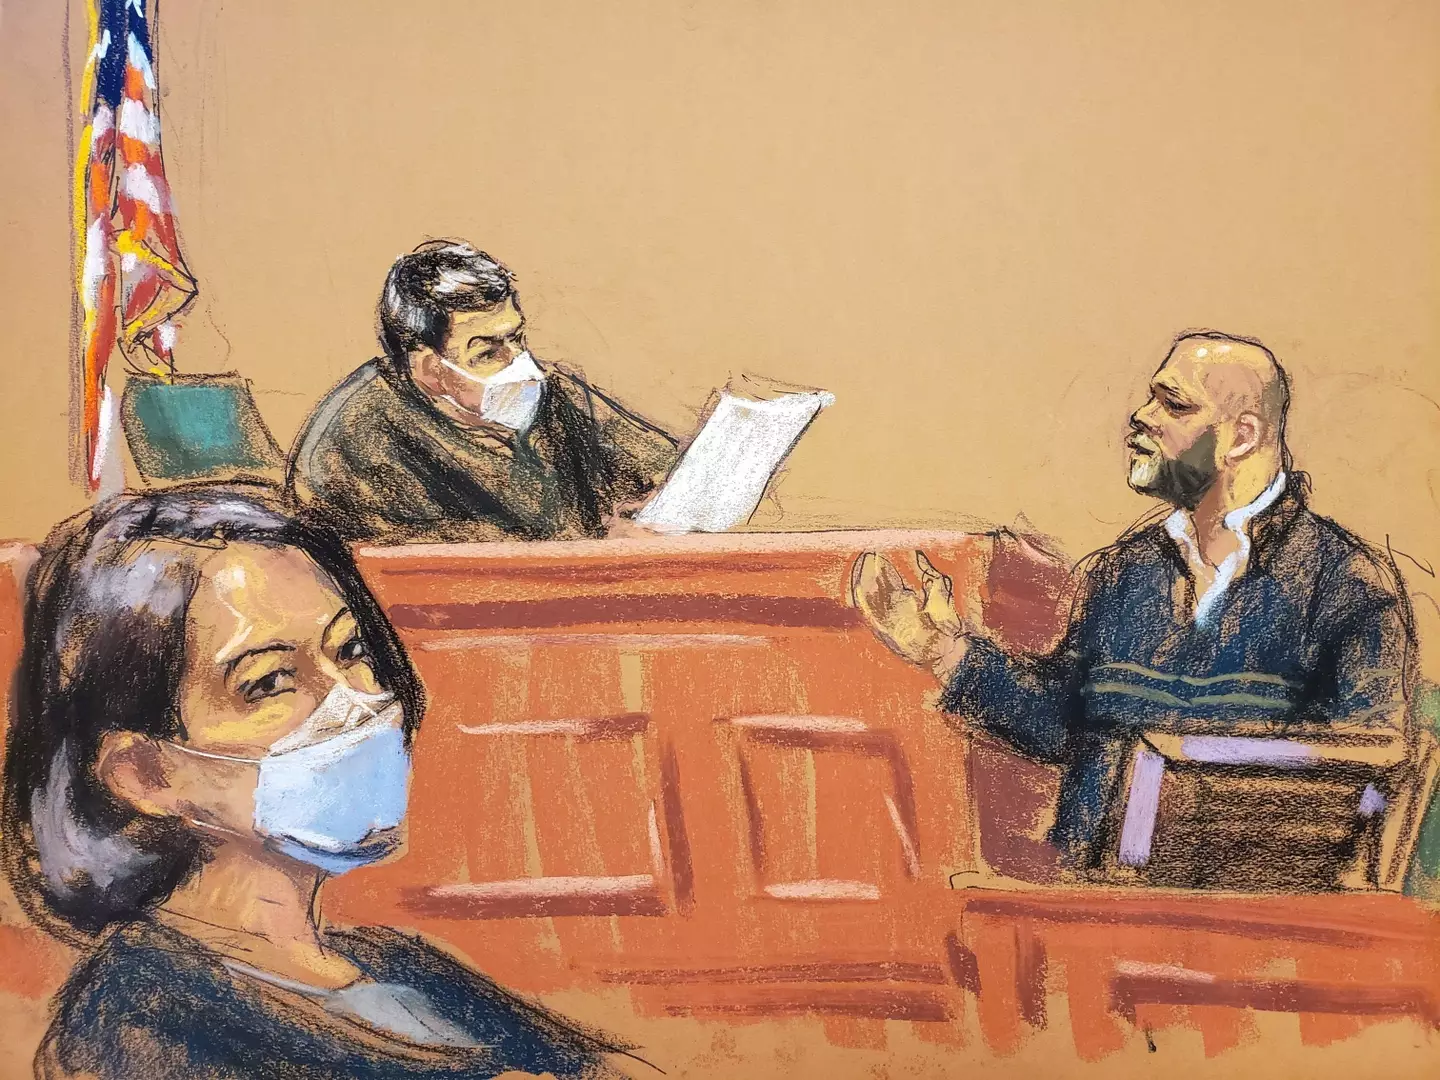 Ghislaine Maxwell sketched at her trial.